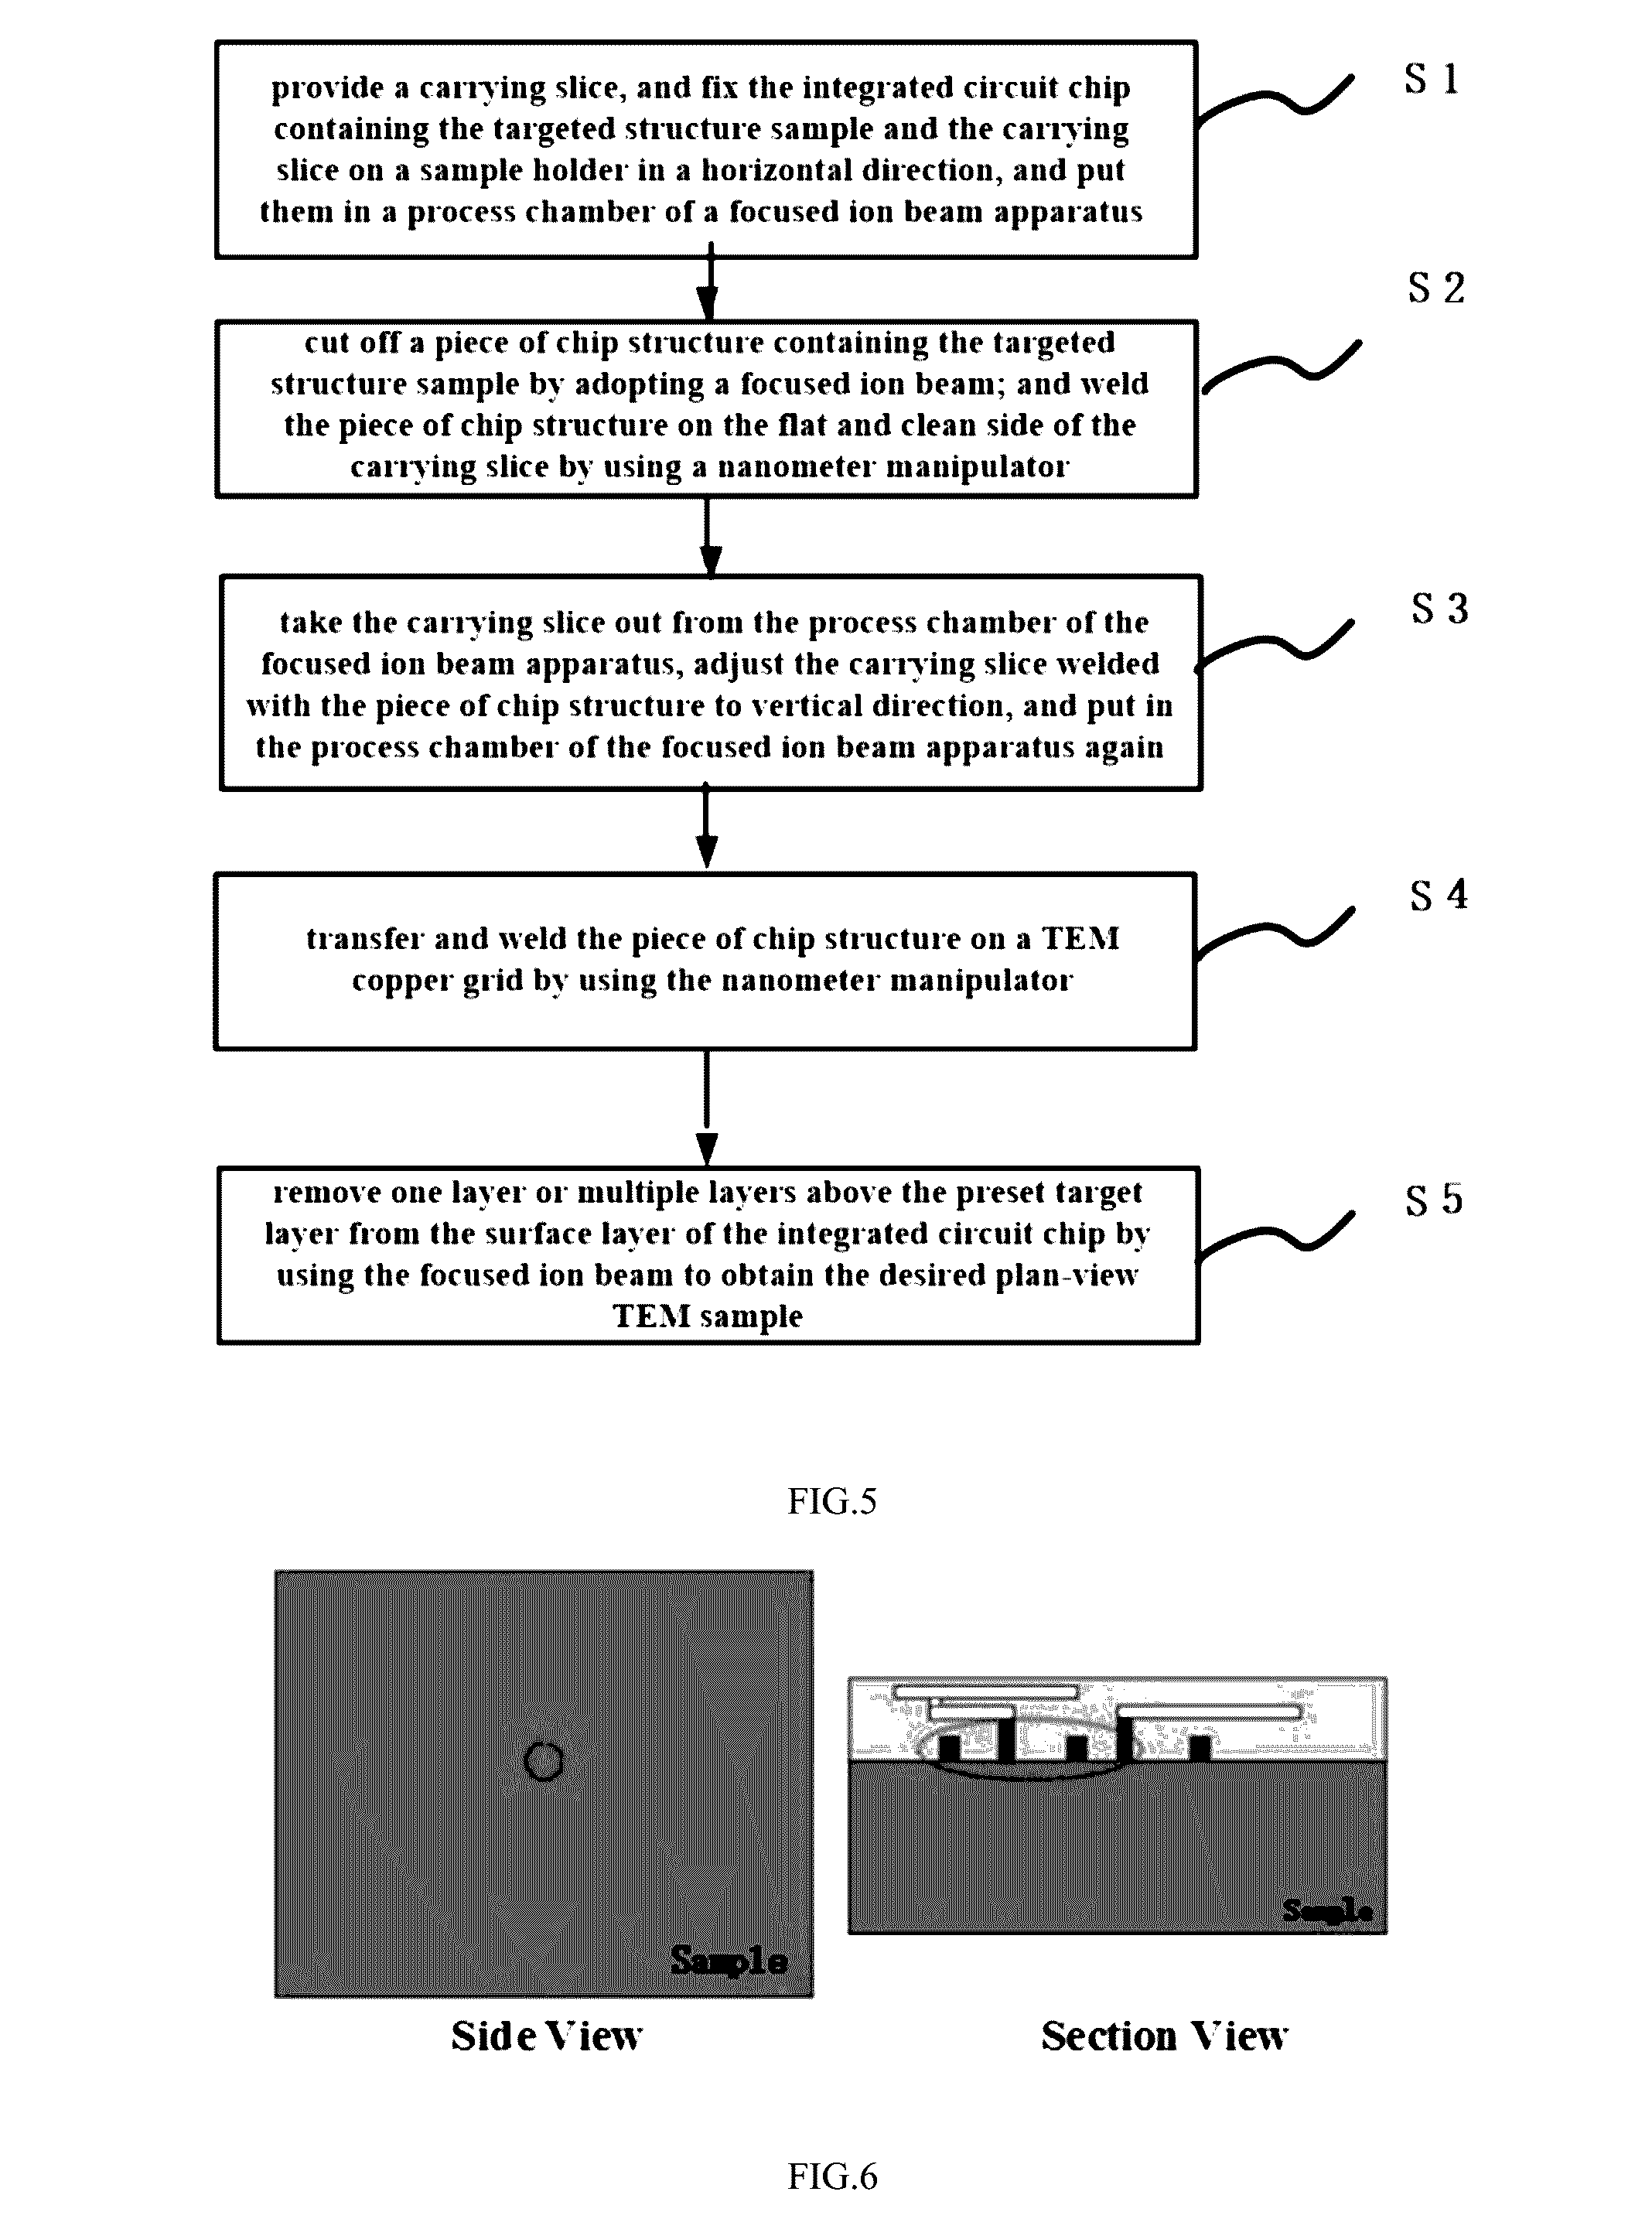 Method of preparing a plan-view transmission electron microscope sample used in an integrated circuit analysis